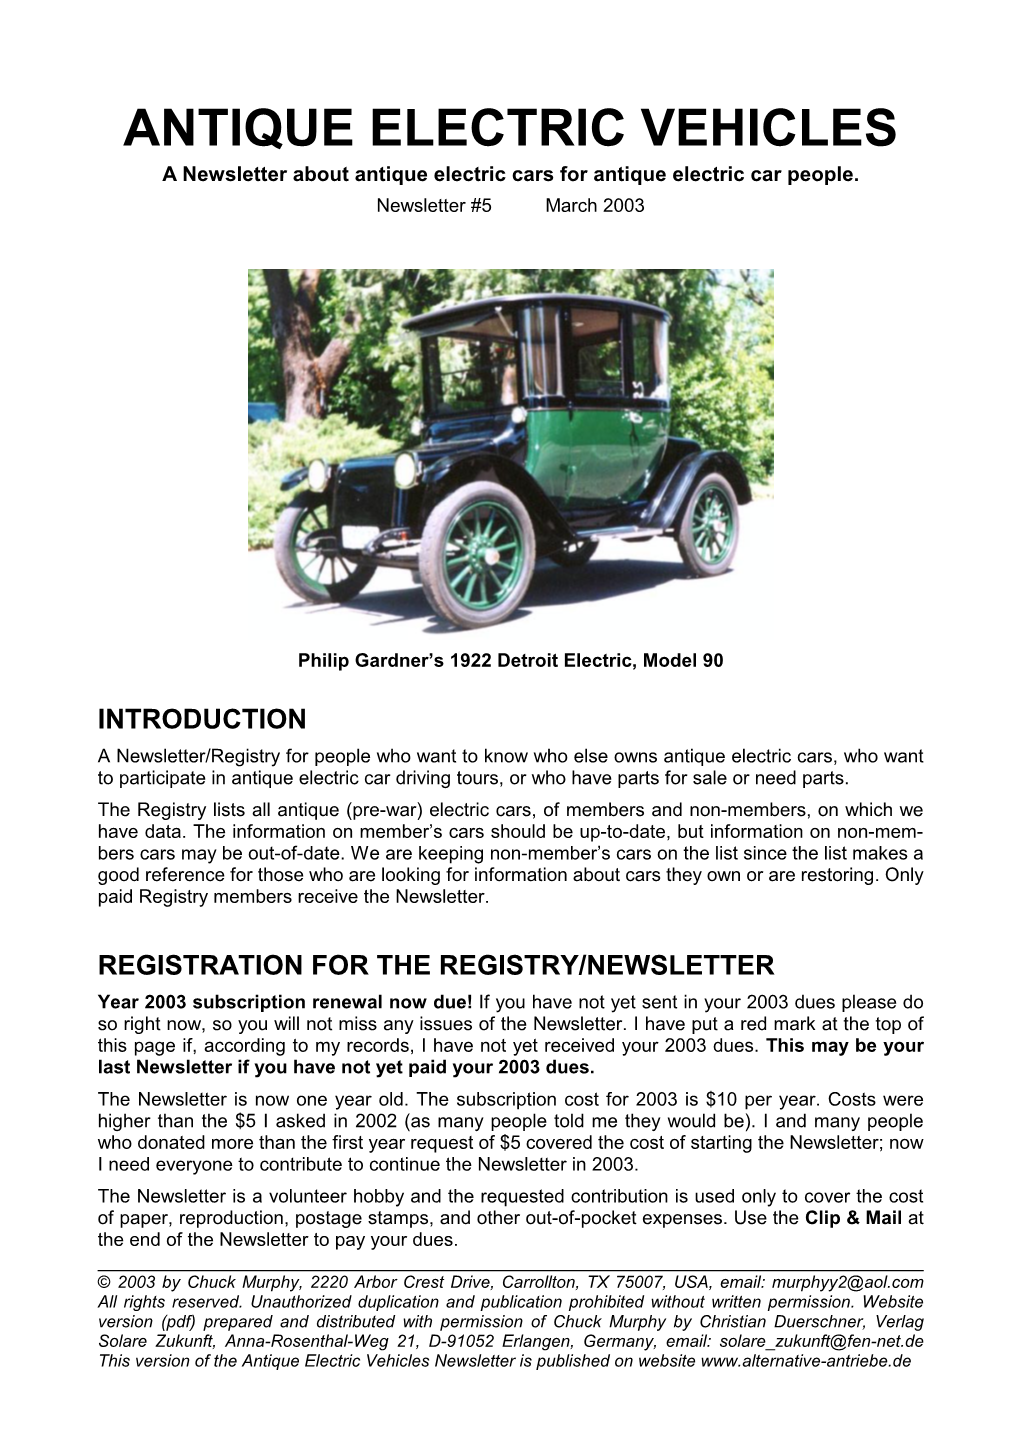 ANTIQUE ELECTRIC VEHICLES a Newsletter About Antique Electric Cars for Antique Electric Car People